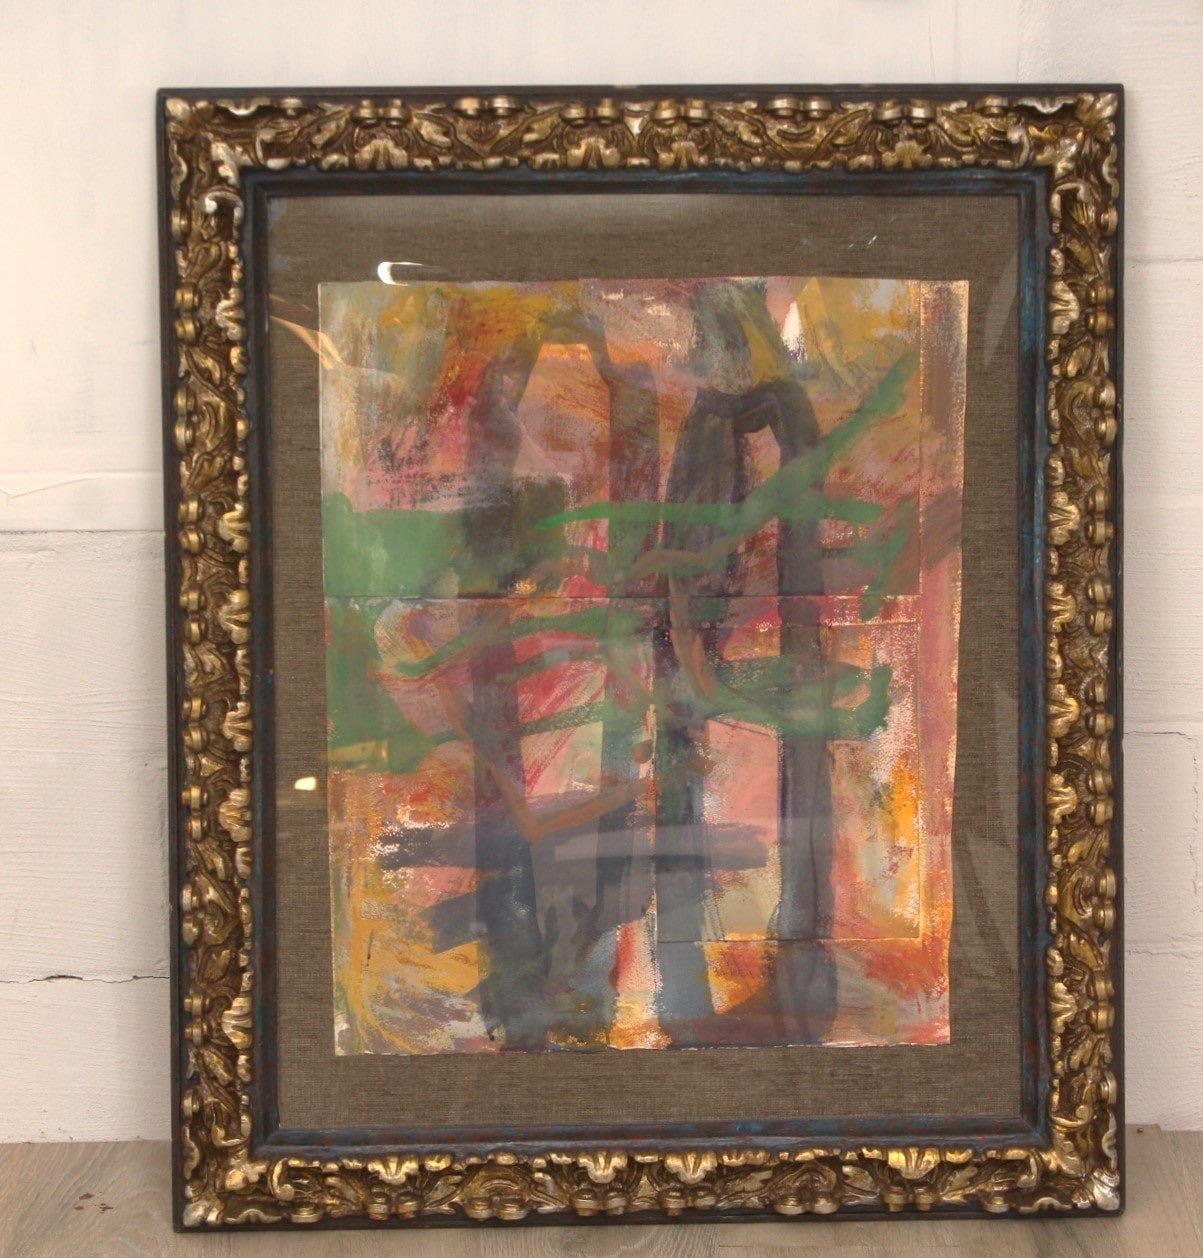 Prudence Whittlesey signed watercolor painting in a gilt wood frame.

Dimensions: 38.5” H x 32” W x 3” D

Bio:
Prudence Whittlesey is an American artist. 
A Pollock-Krasner Foundation grant recipient, 
she was a Wu Tsai Artist-in-Residence for Fall